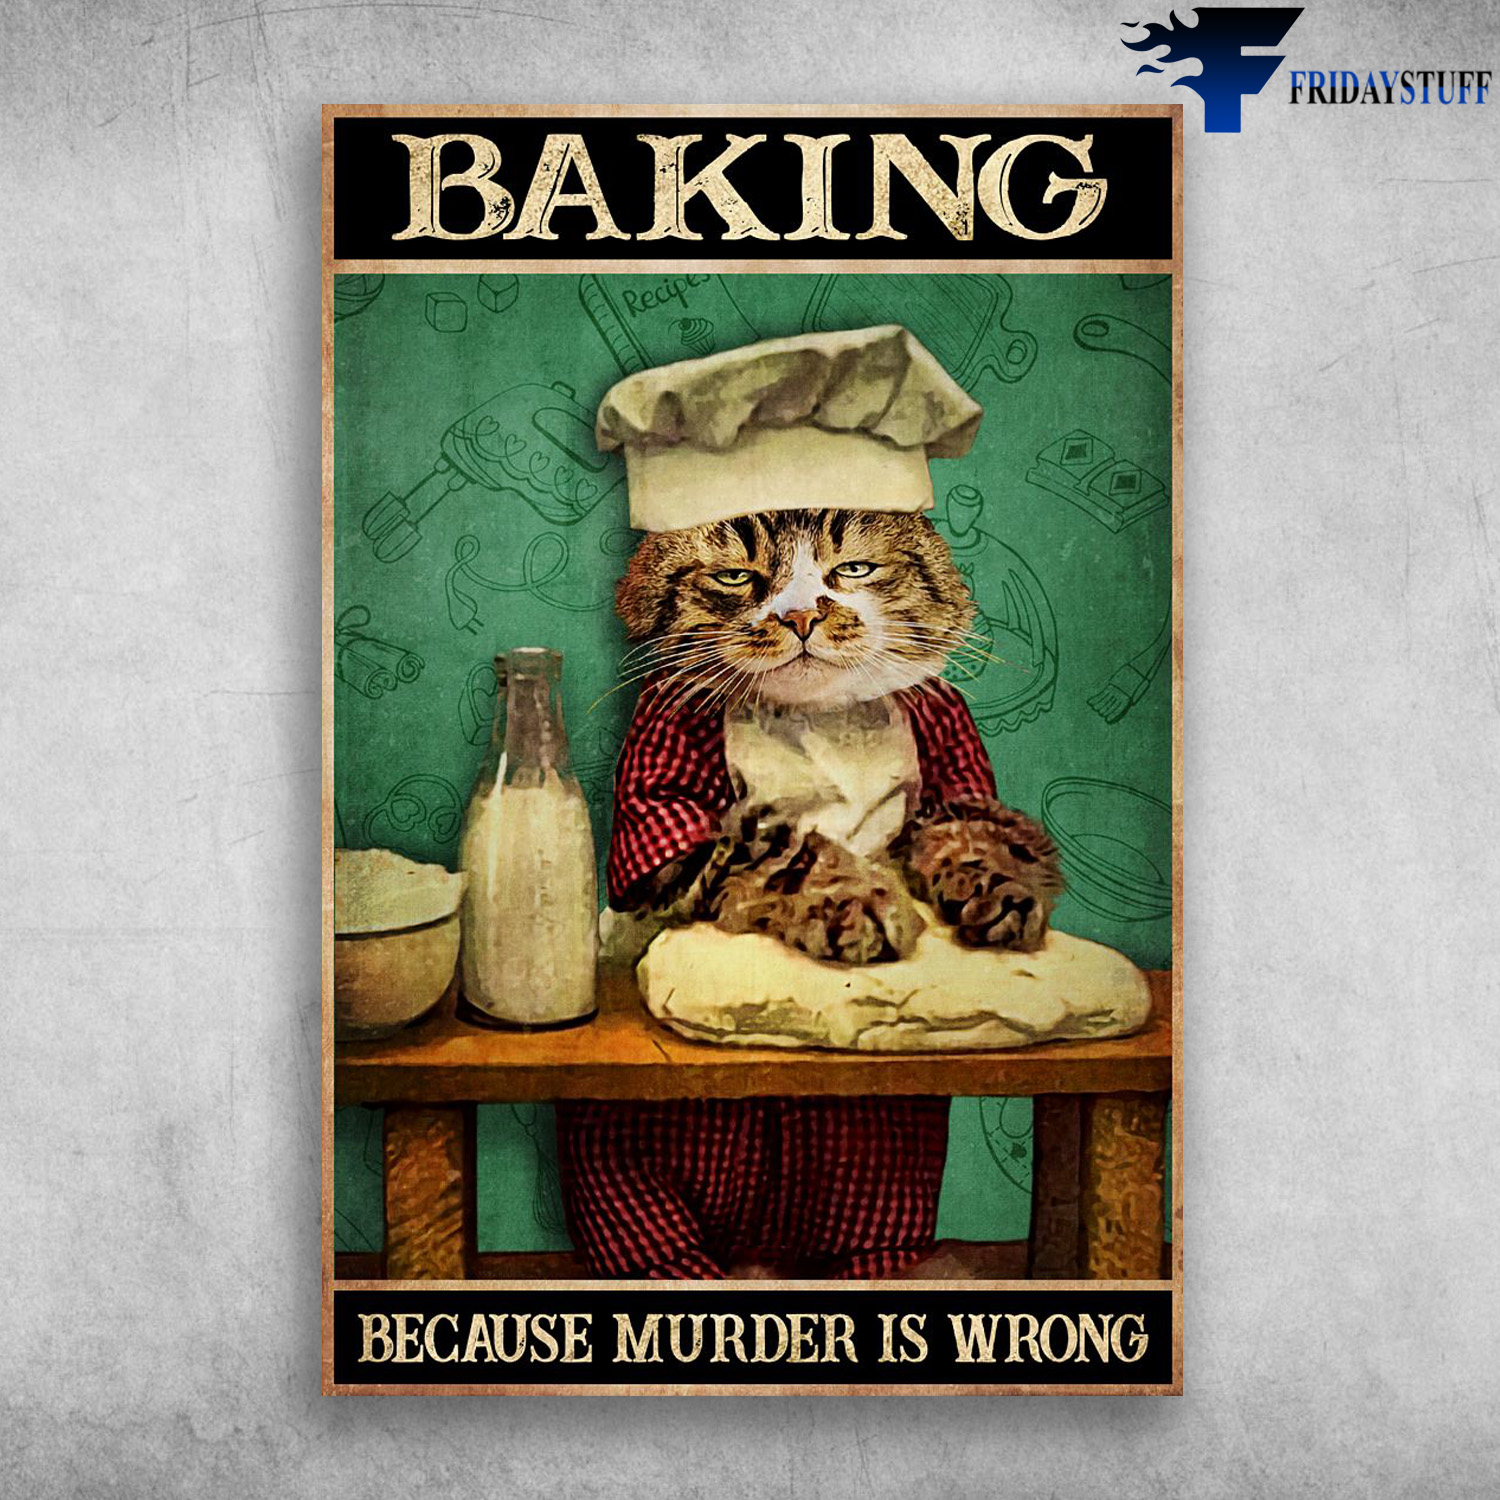 The Cat Baking - Because Murder Is Wrong